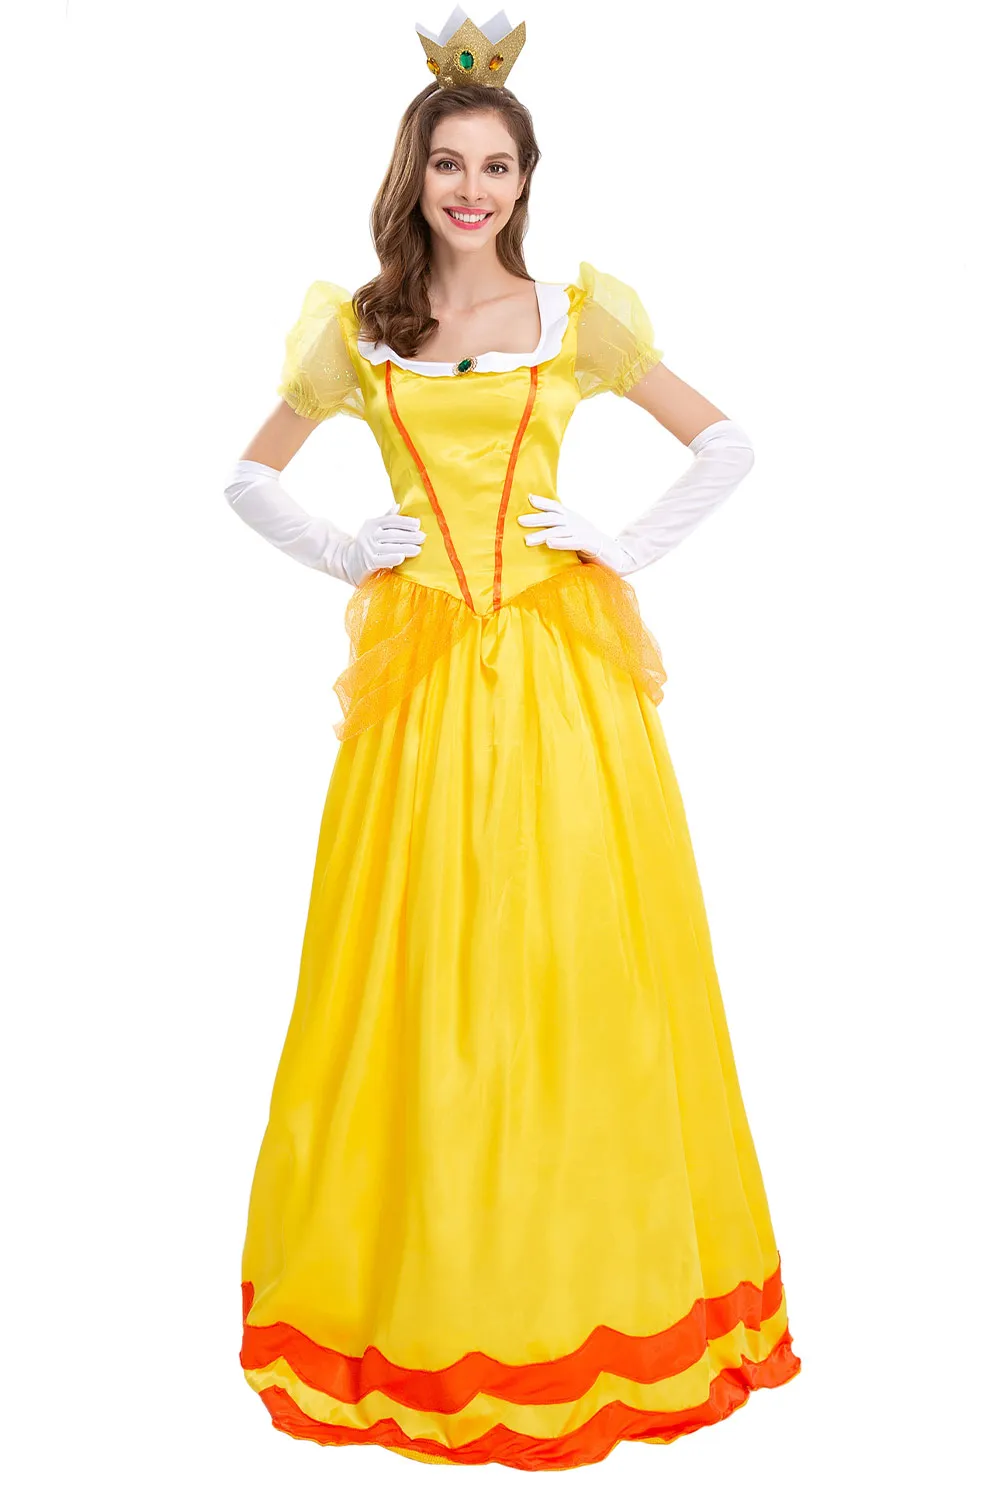 

Anime Game Princess Daisy Cosplay Women Costume Princess Roleplay Fantasia Woman Halloween Carnival Disguise Role Playing